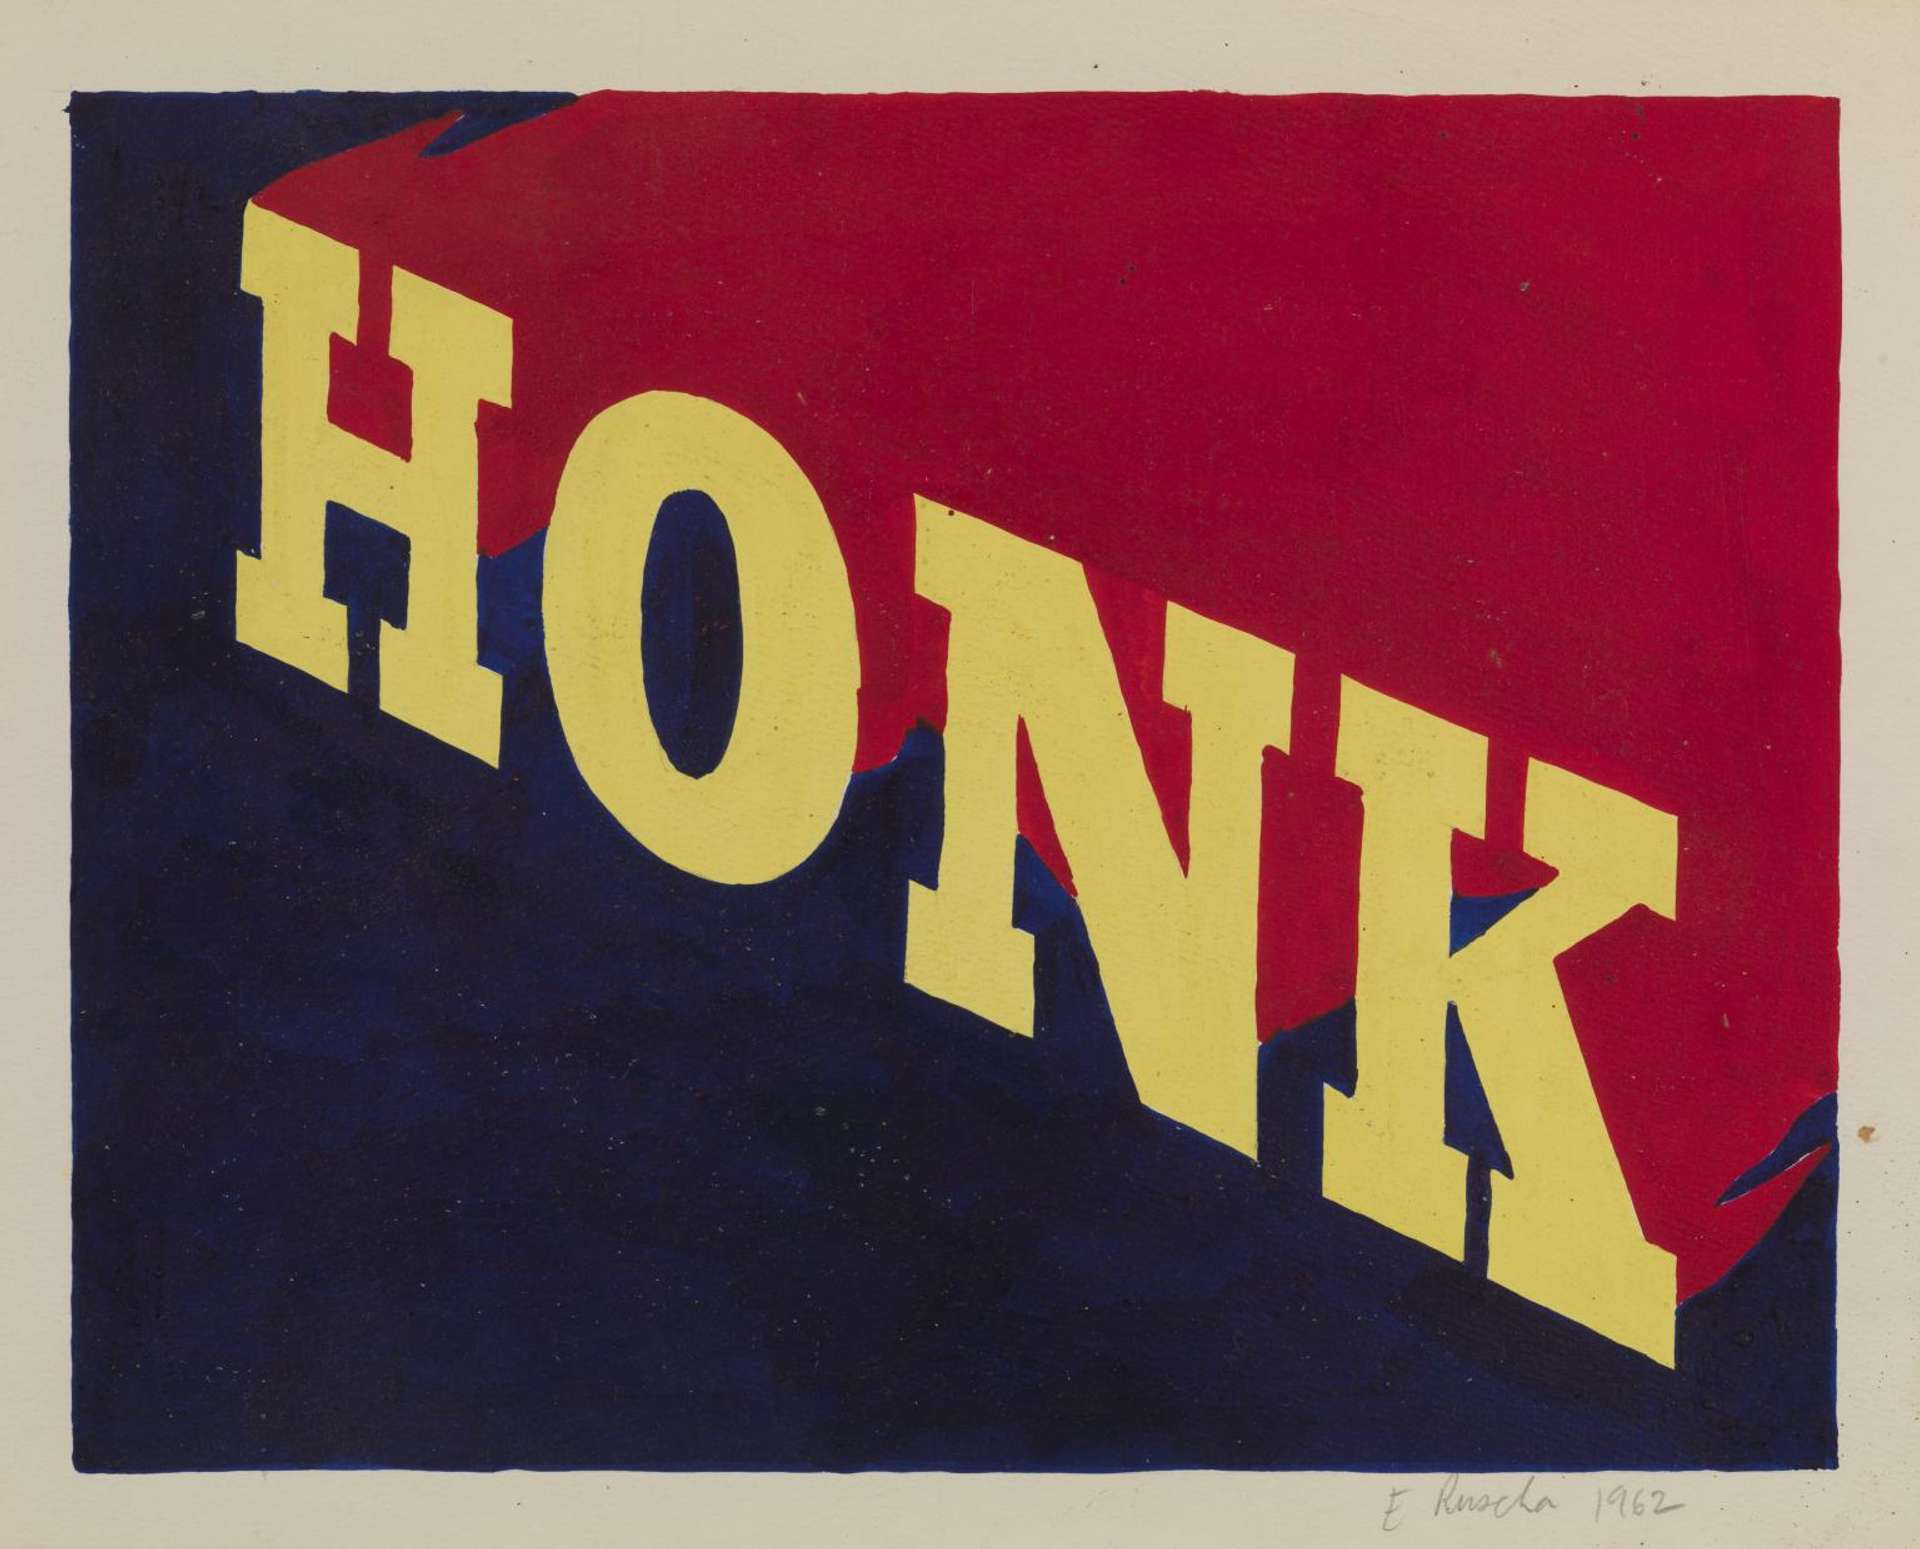 Painting by Ed Ruscha depicting the word 'HONK', in capitalised, diagonally inclined serif typography. The letters are painted in bright yellow and are set against a deep blue background. The letters are trailing an area of deep red that is perpendicular to the yellow lettering, giving a suggestion of depth within the picture plane.